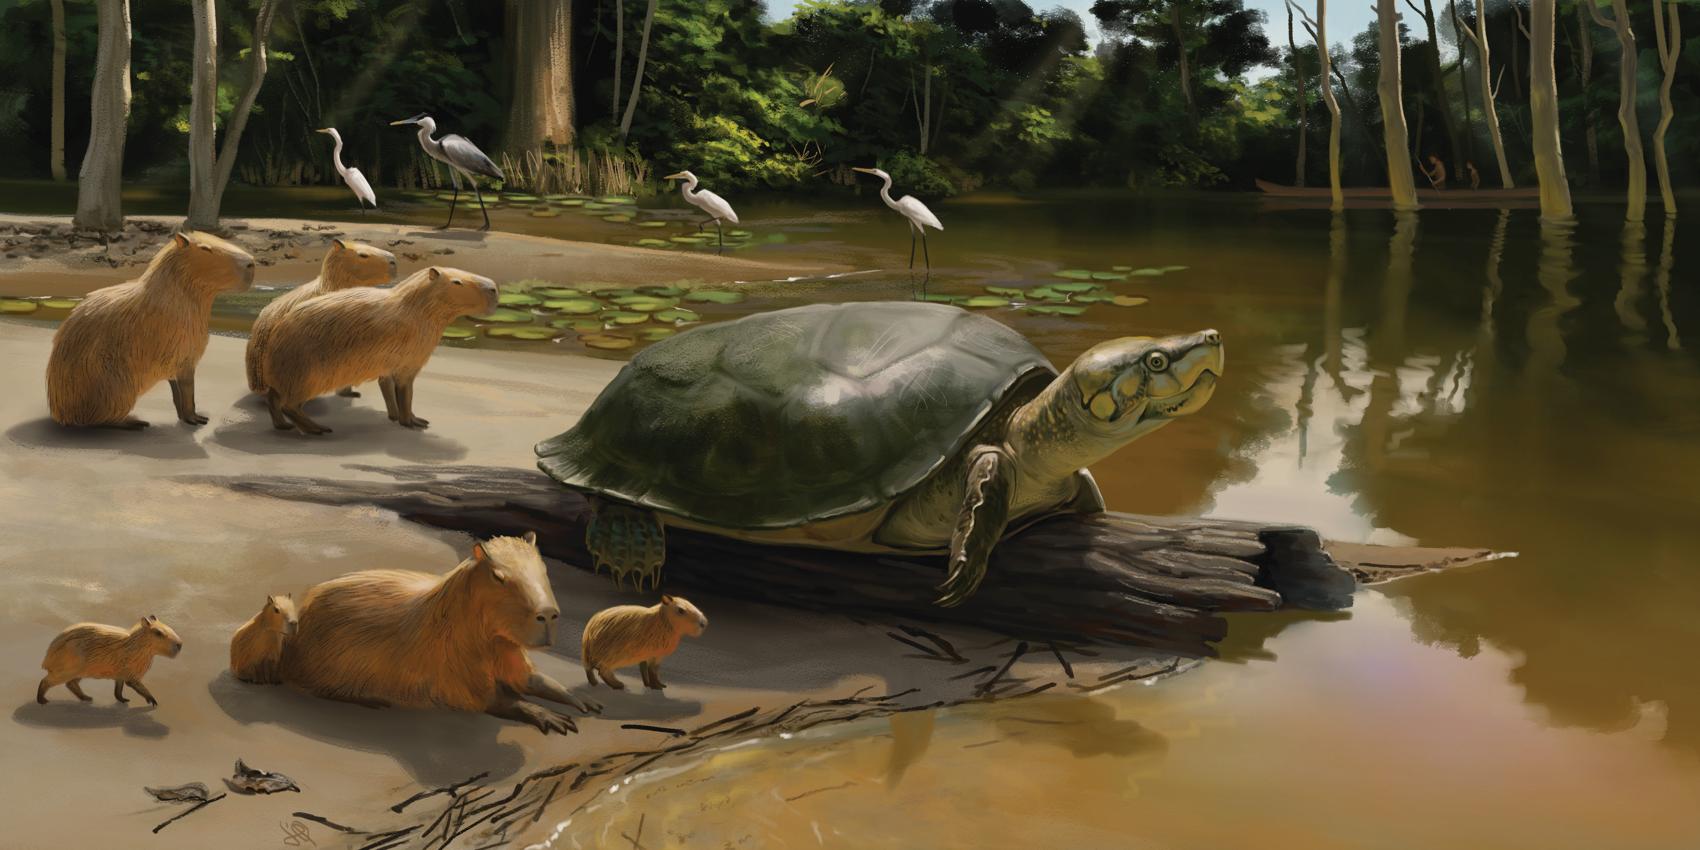 Giant turtle on the bank of a body of water with herons and capybaras